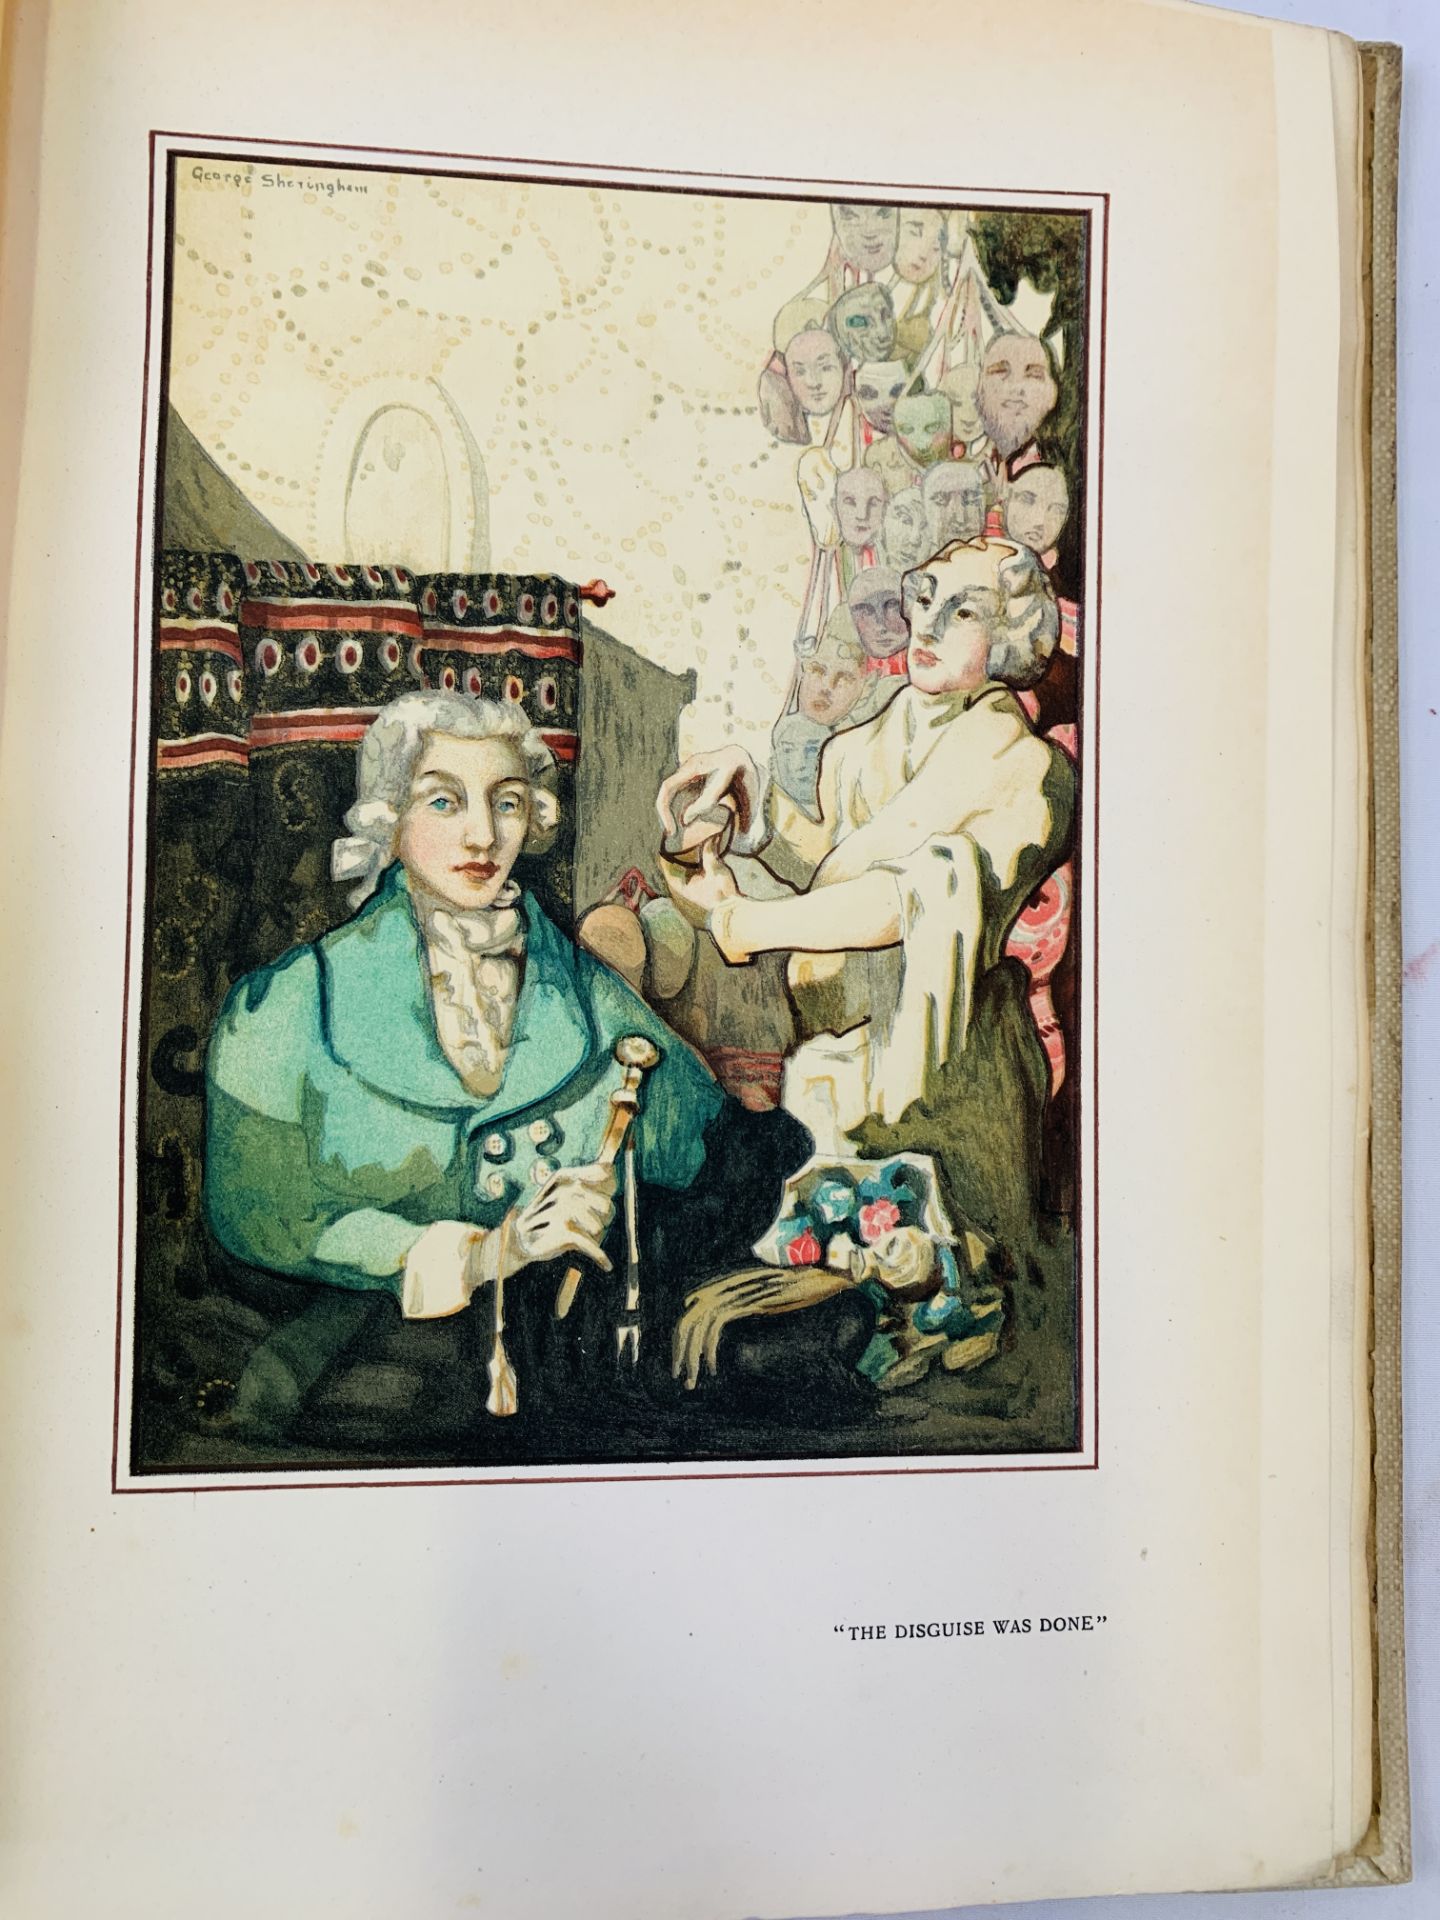 The Happy Hypocrite by Max Beerbohm and illustrated by George Sheringham, 1915 - Image 3 of 4